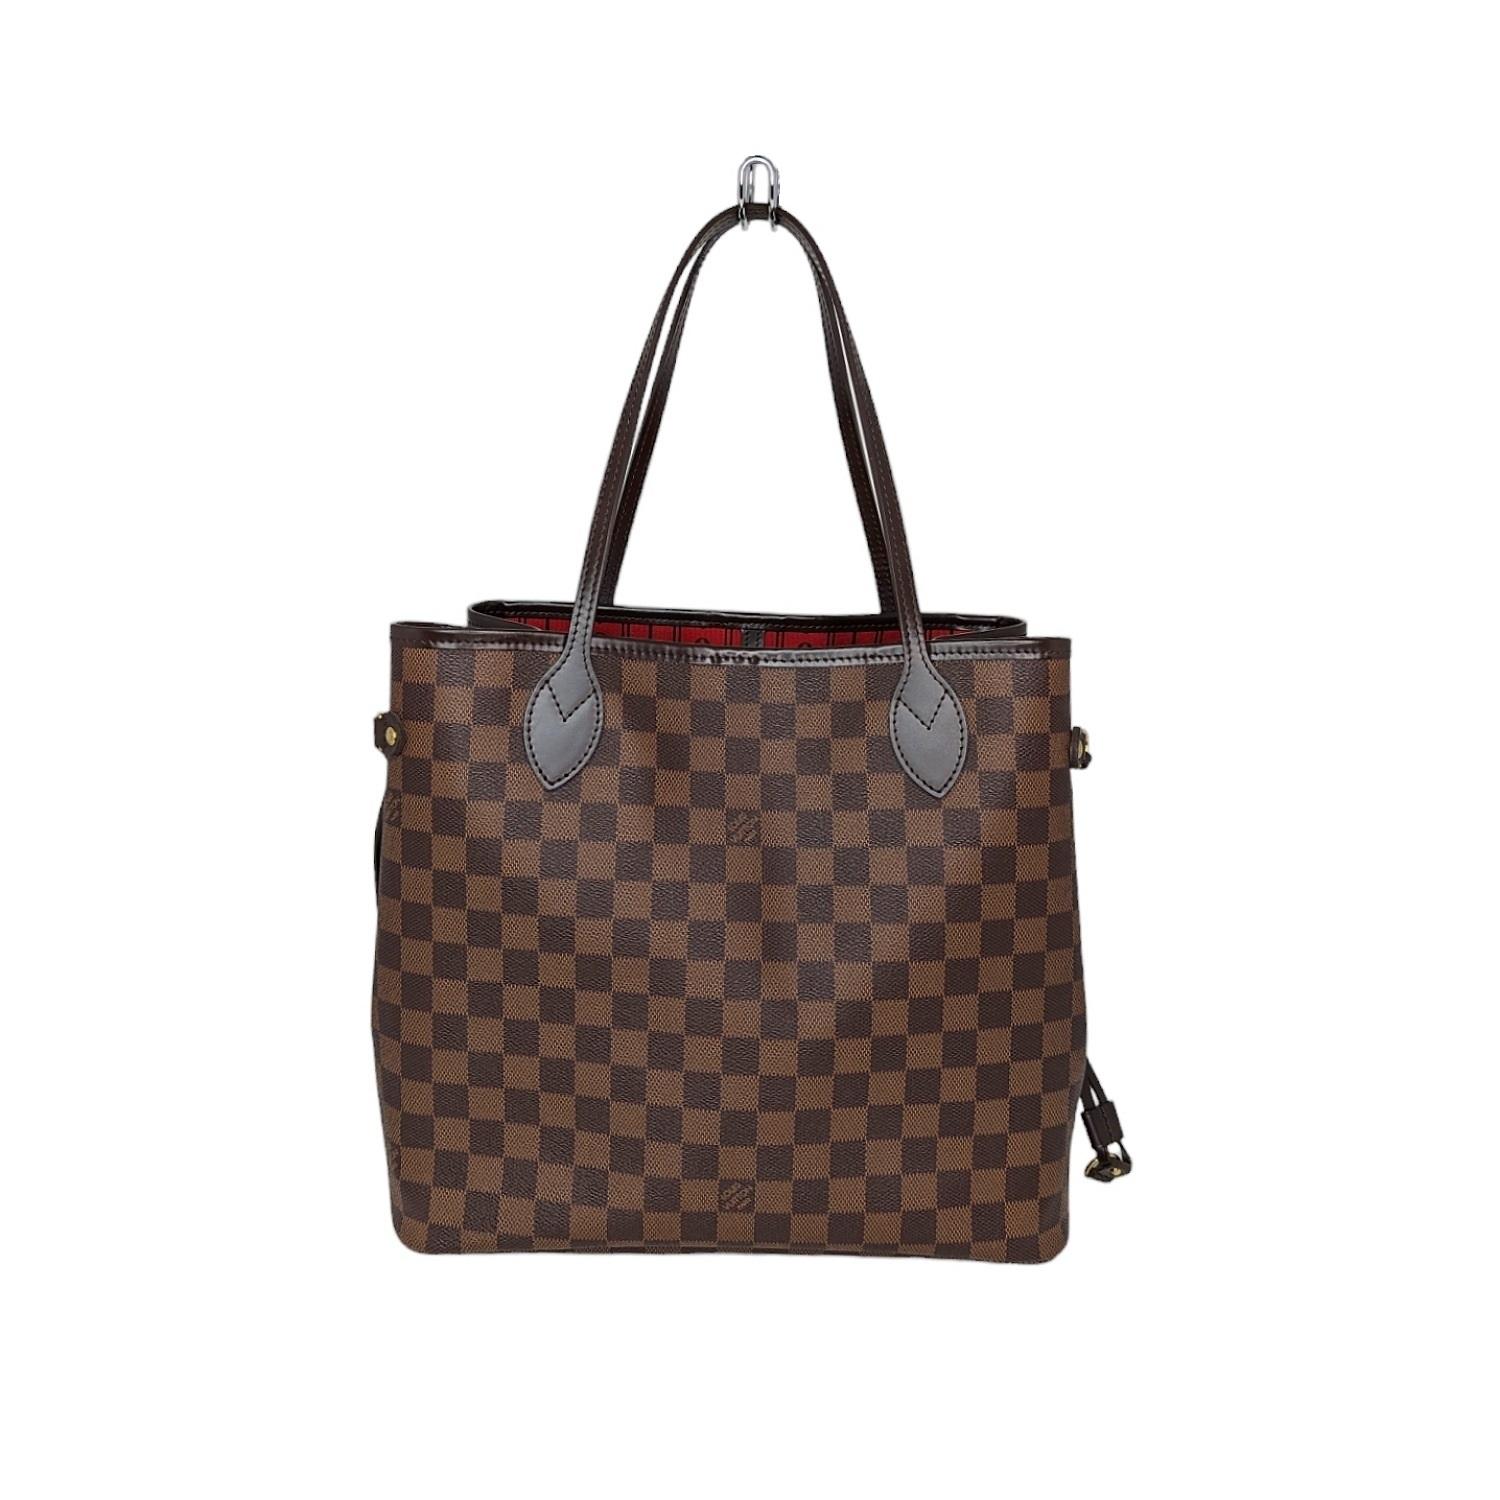 This chic tote is crafted of classic Louis Vuitton Damier in brown on coated canvas. The shoulder bag features chocolate brown cowhide leather trim, shoulder straps, side cinch cords, and has polished brass hardware. The top is open to a striped